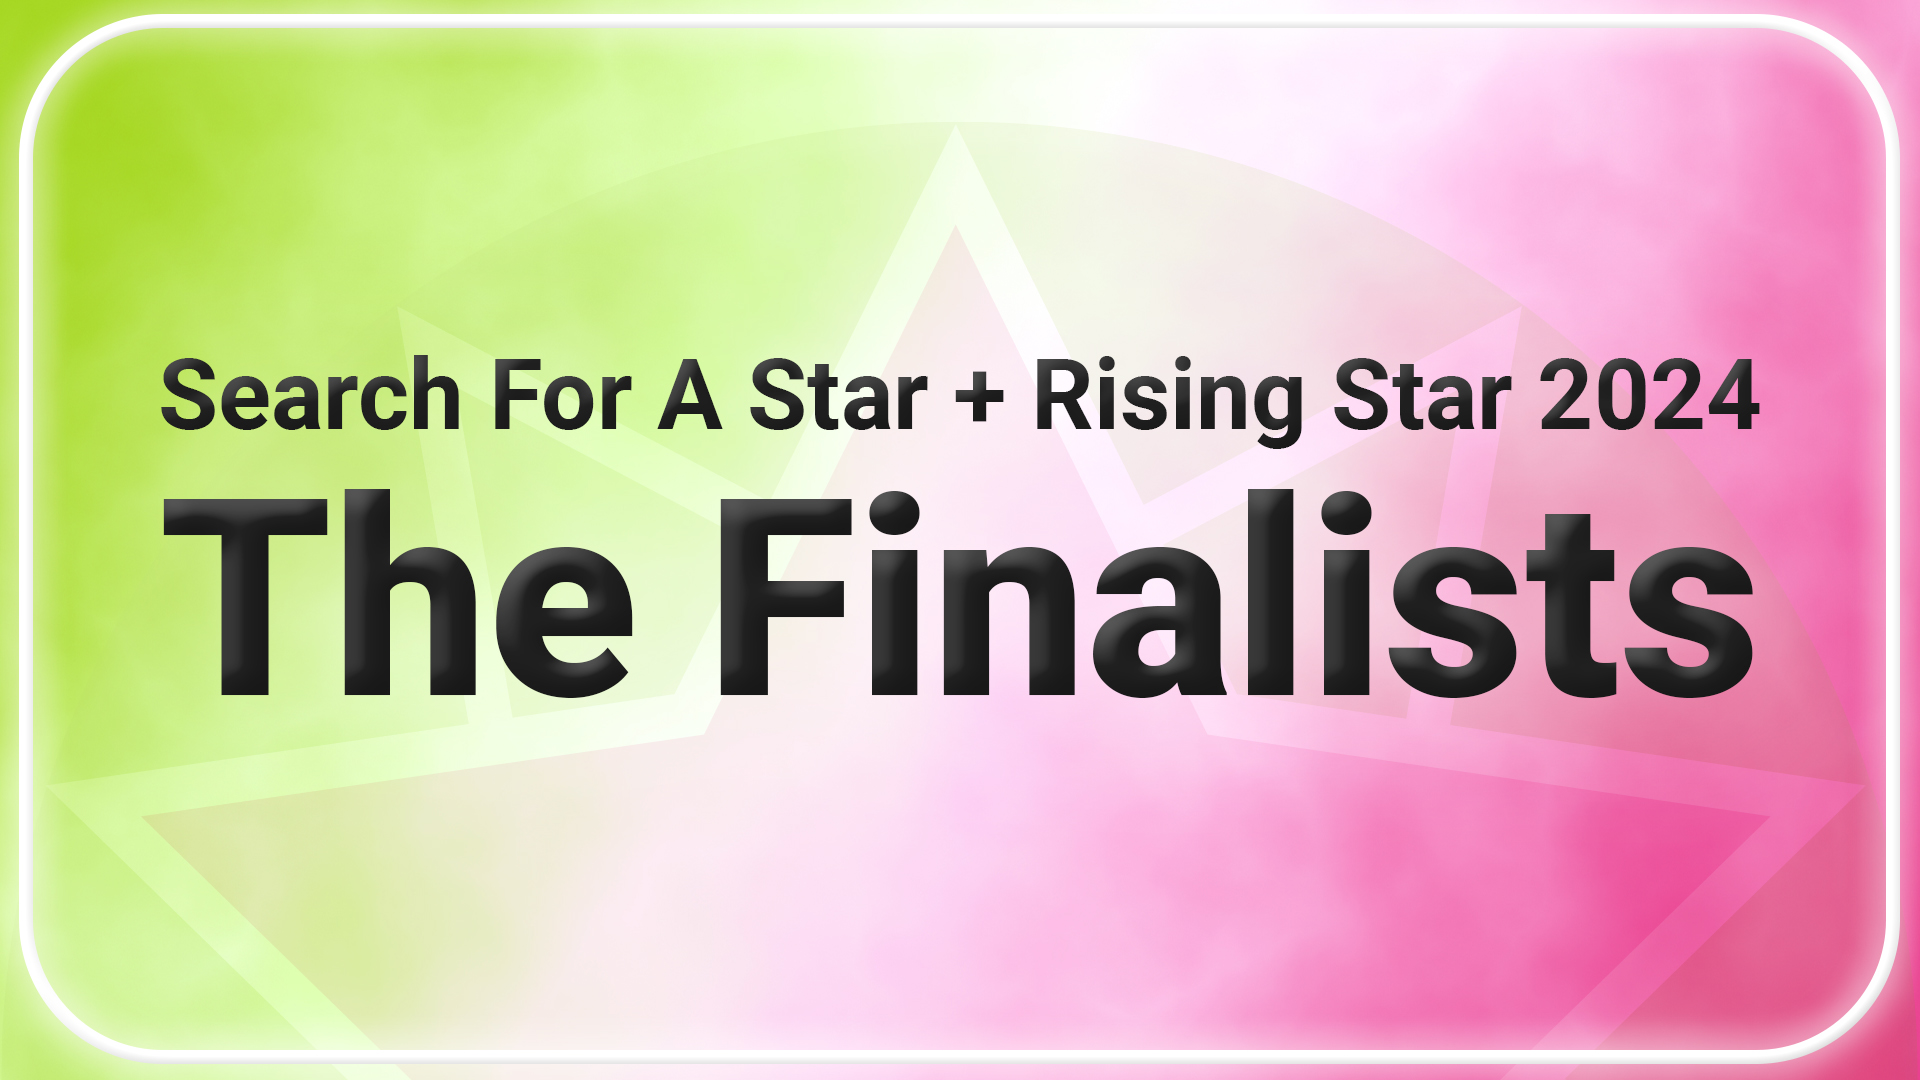 SFAS 2024 | The Finalists